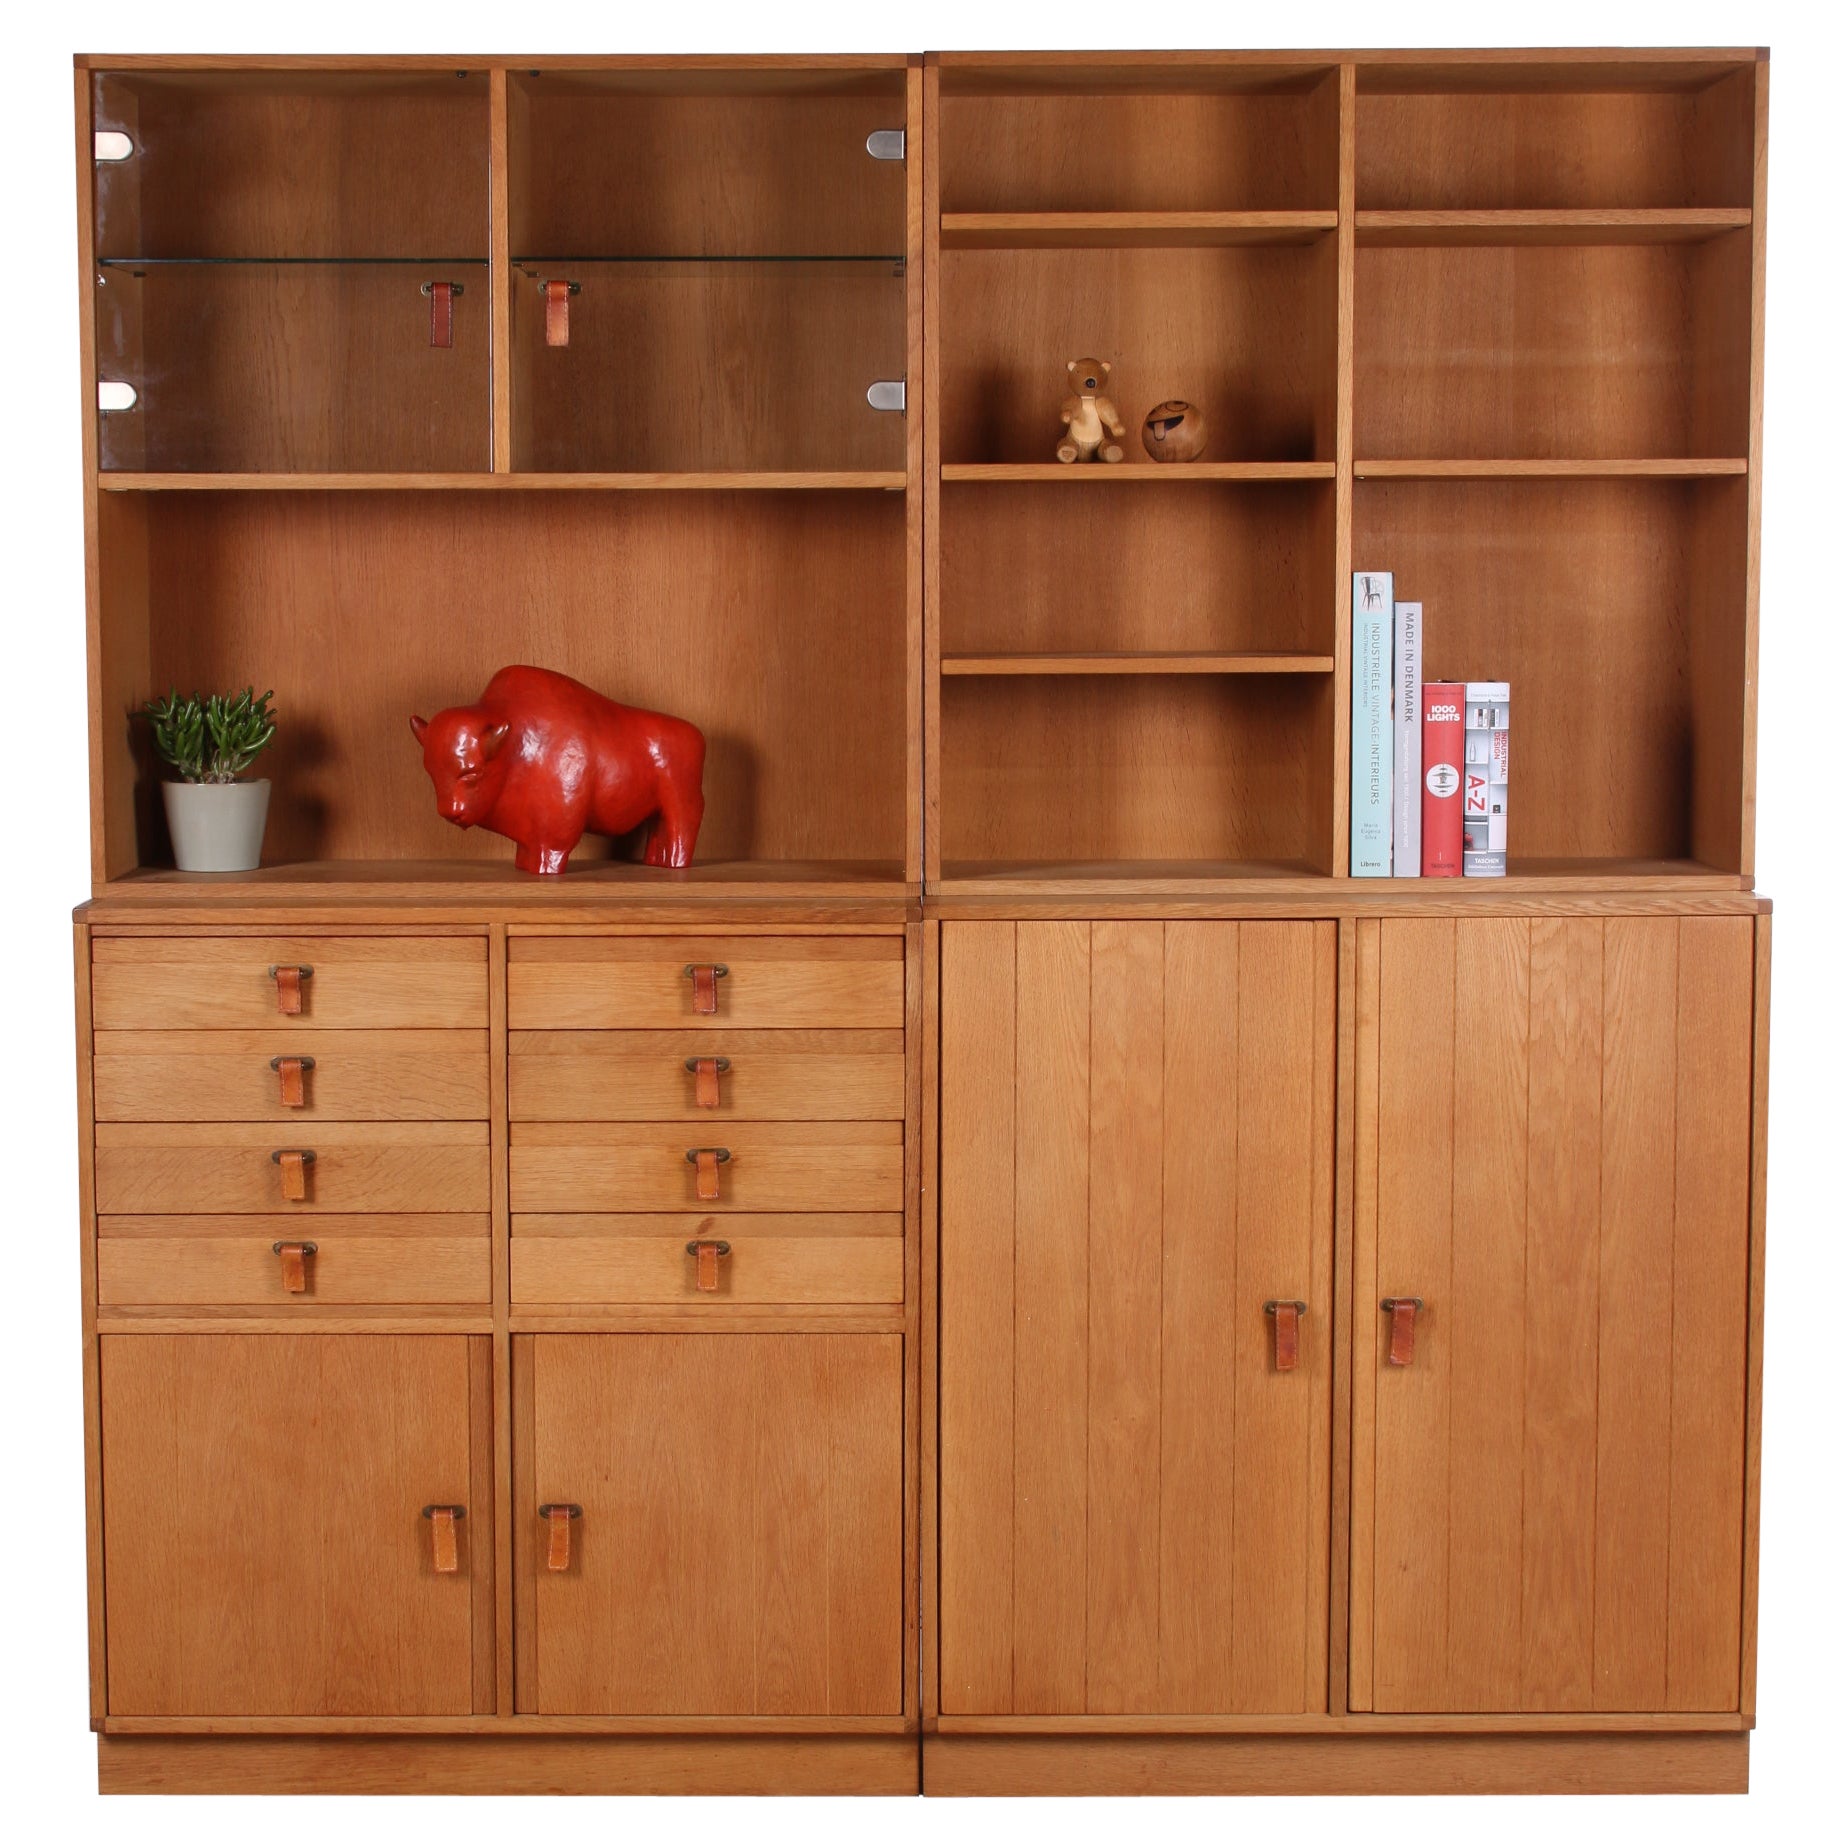 Discover the charm of mid-century design with this authentic Kurt Østervig oak wall unit, made by K.P. Møbler in the 60s. This piece of furniture exudes quality and craftsmanship with its sturdy oak construction and timeless appearance. The clean